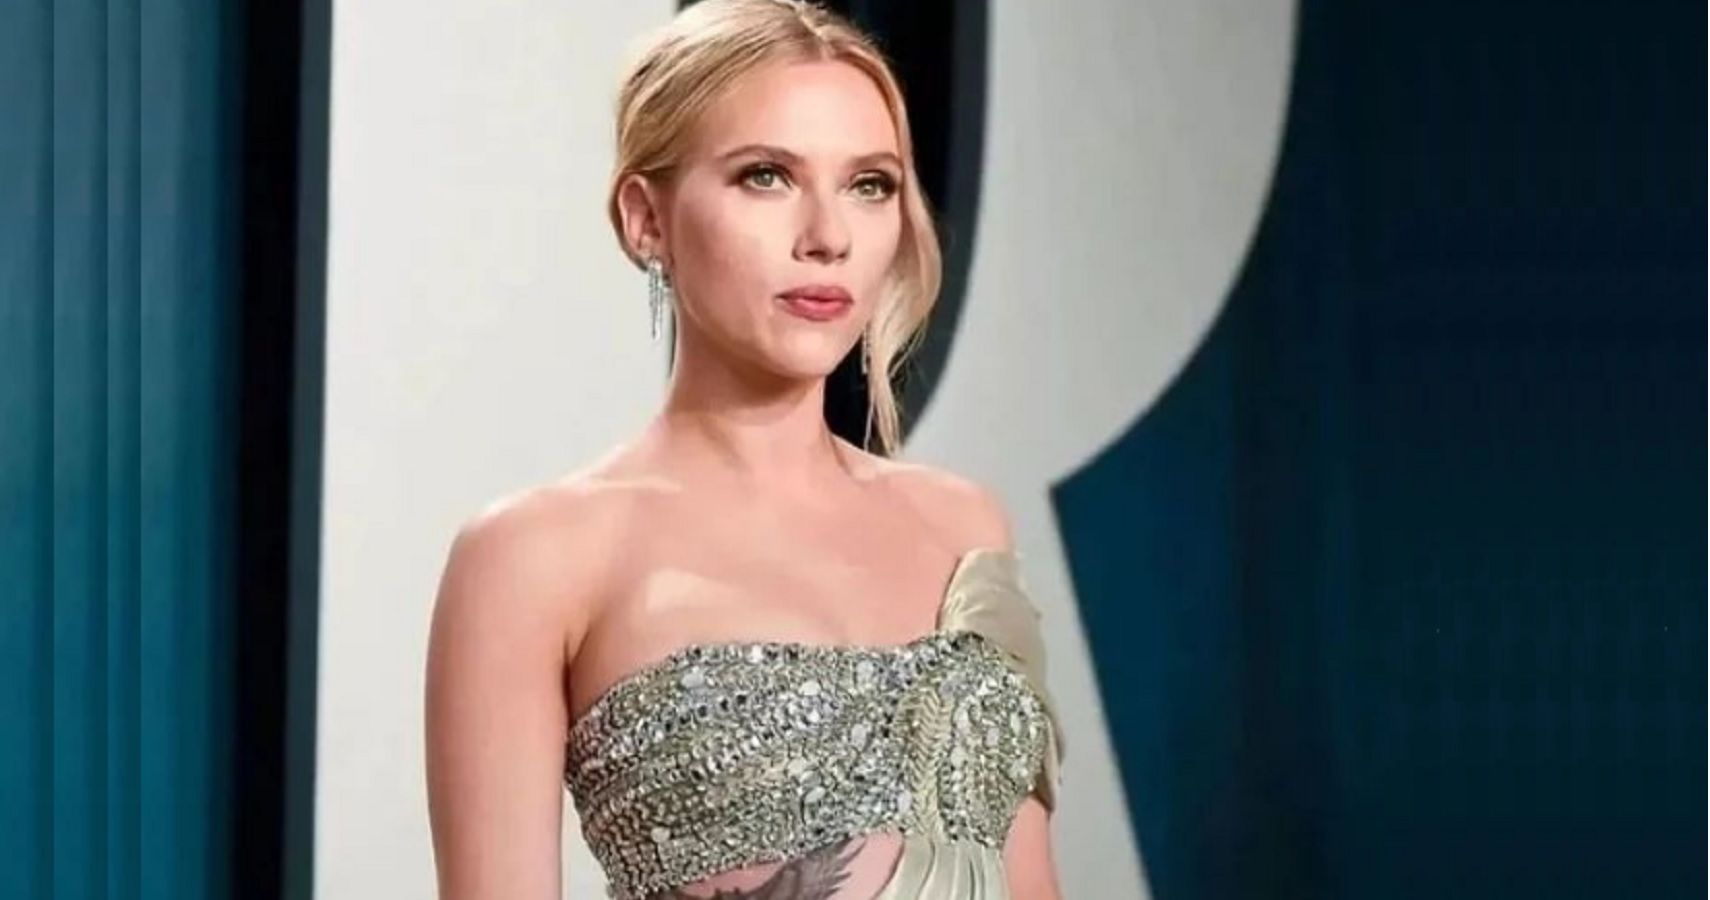 Scarlett Johansson Doesn't Even Need to Star in a Movie to Be Hollywood's  Highest-Paid Actress